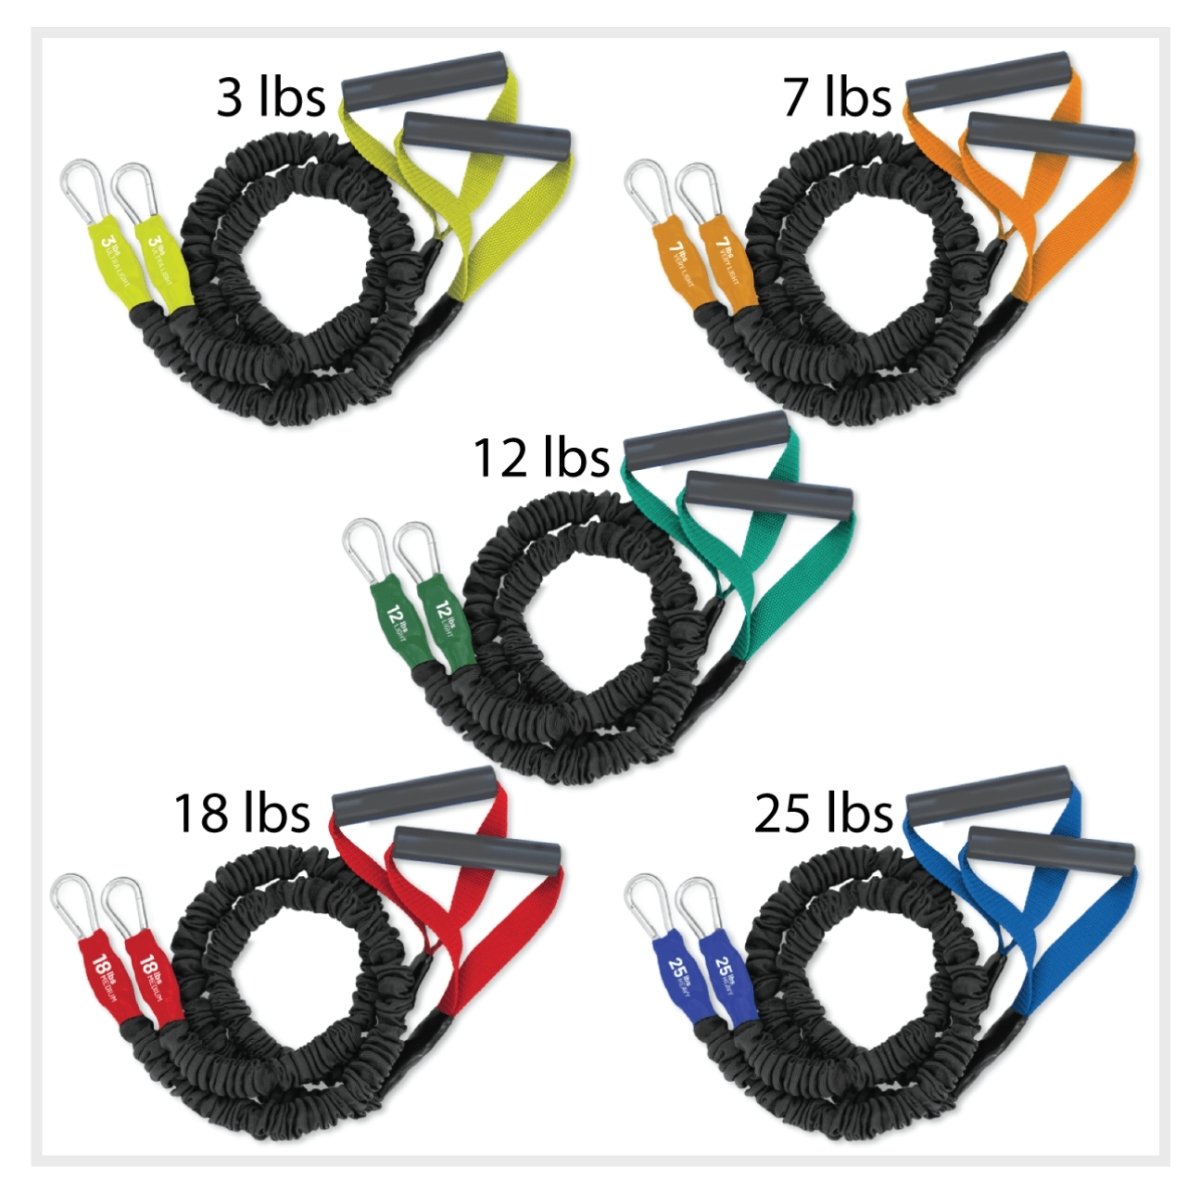 X-Over Shoulder and Arm Resistance Bands- 5 Pack (3lb/7lb/12lb/18lb/25lb) - FitCord Resistance Bands American made Arm and shoulder covered resistance tubes for rehab and building your shoulders, relieving pain in rotator cuff, working out, exercising and home gyms